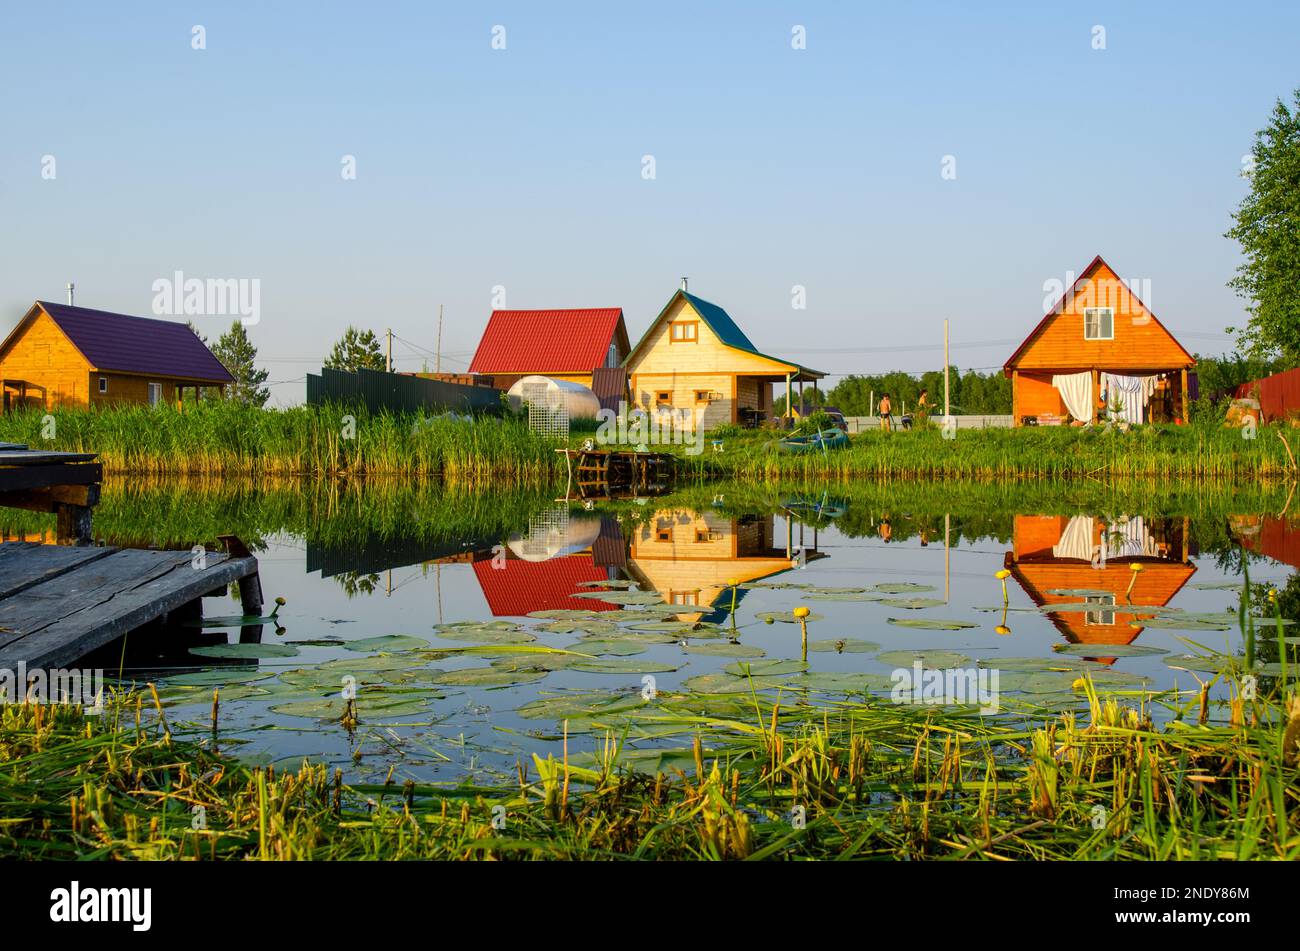 A small pier made of boards in the garden by the pond among grass and water lily flowers against the backdrop of wooden cottages. Stock Photo